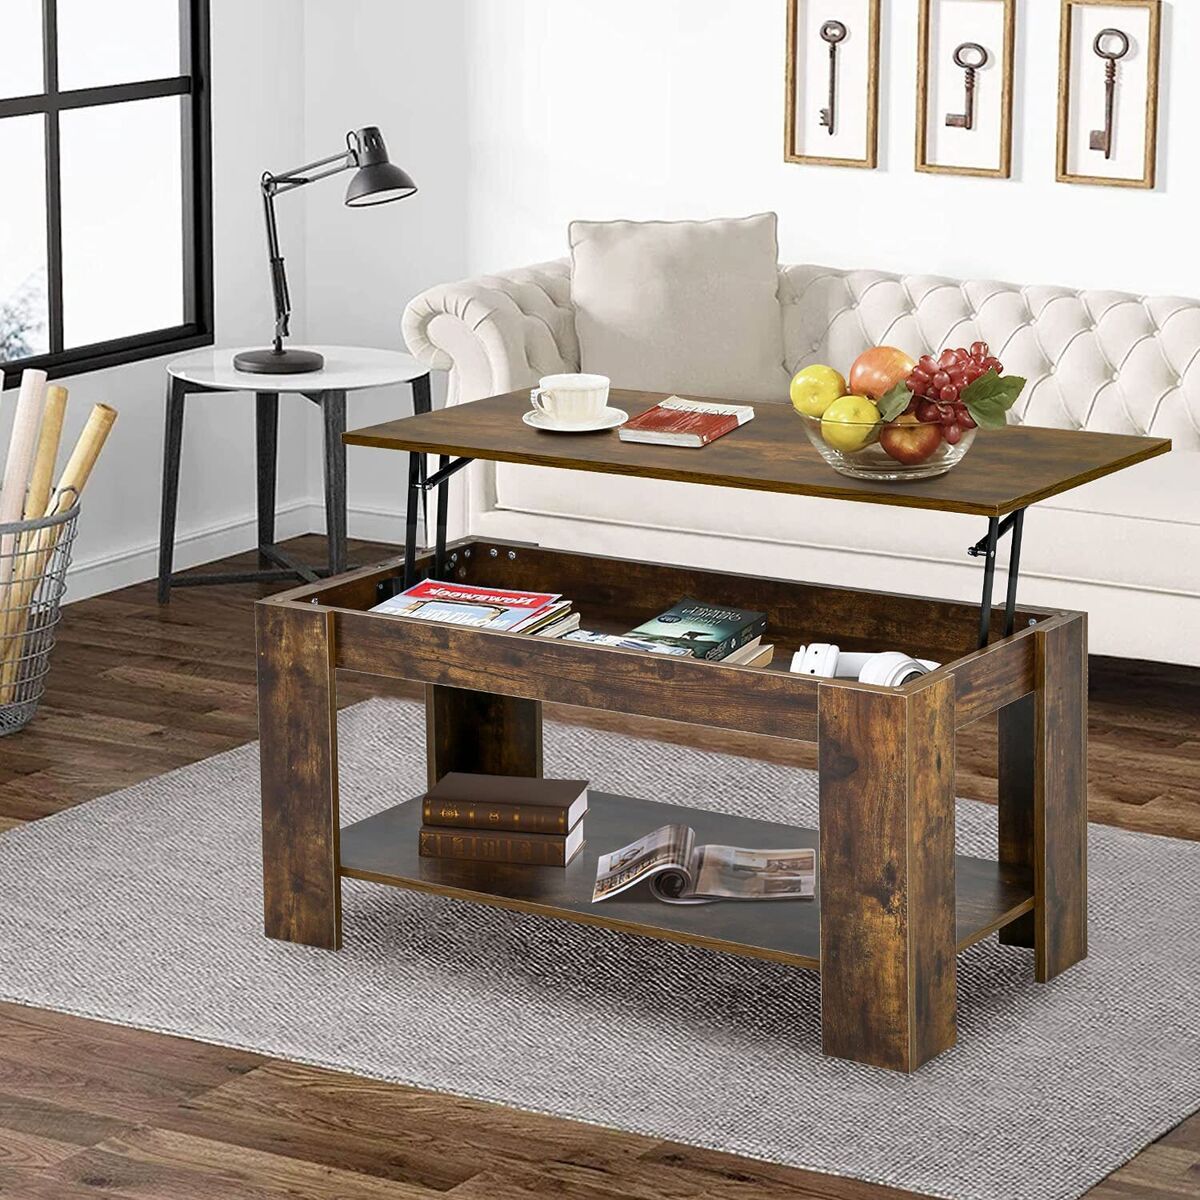 Lift Top Coffee Table With Hidden Compartment And Storage Shelf For Living  Room | Ebay Pertaining To Lift Top Coffee Tables With Shelves (Photo 13 of 15)